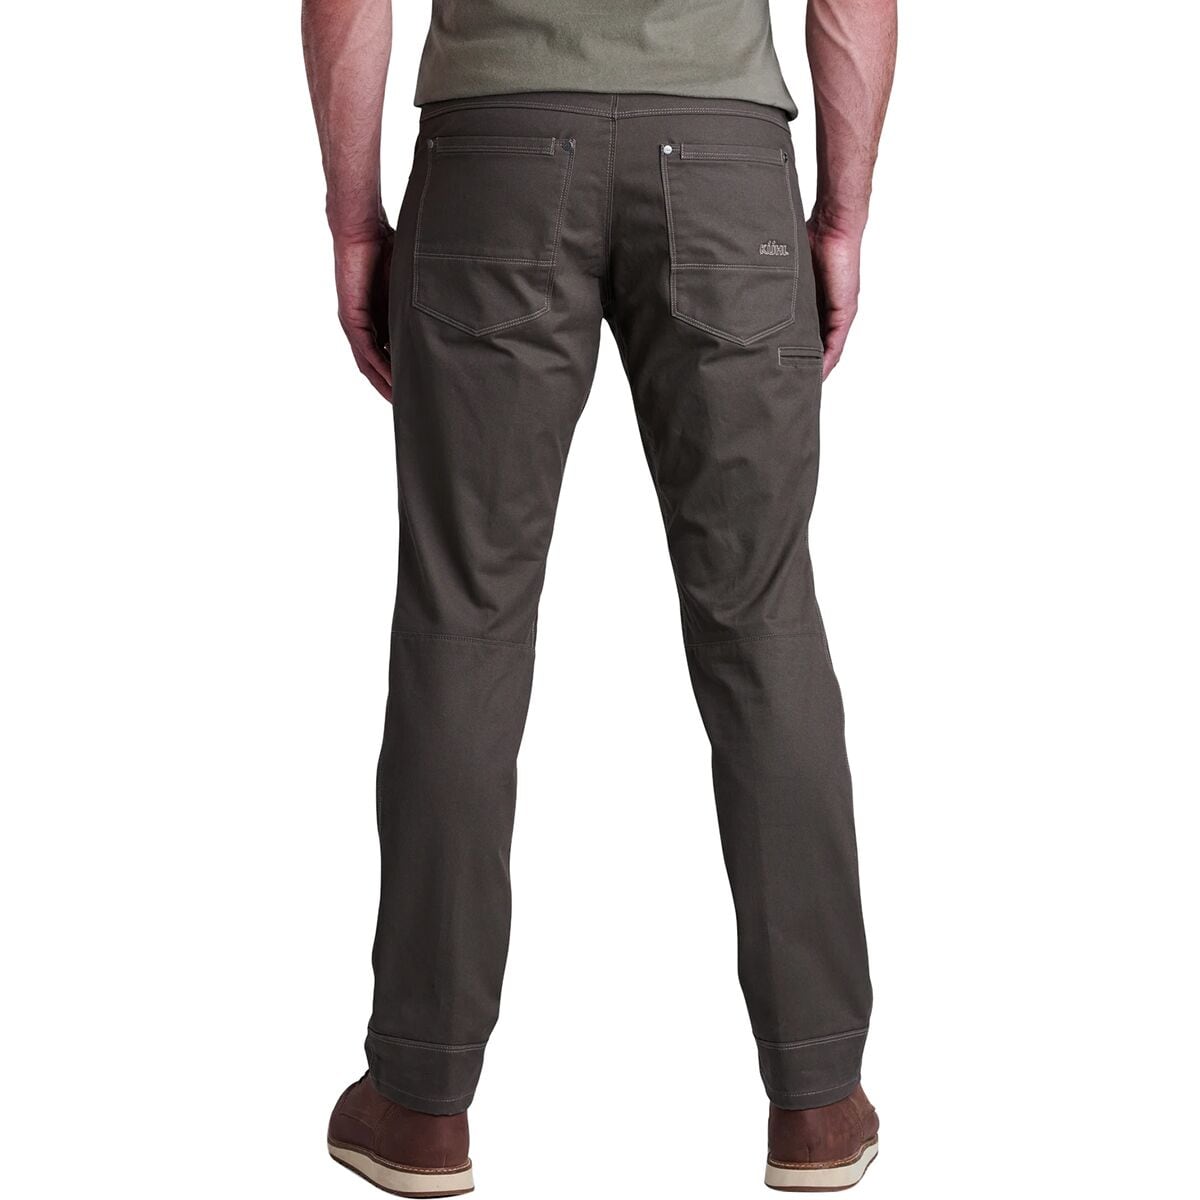 Kuhl Men's Free Rydr Pants, Pants, Clothing & Accessories